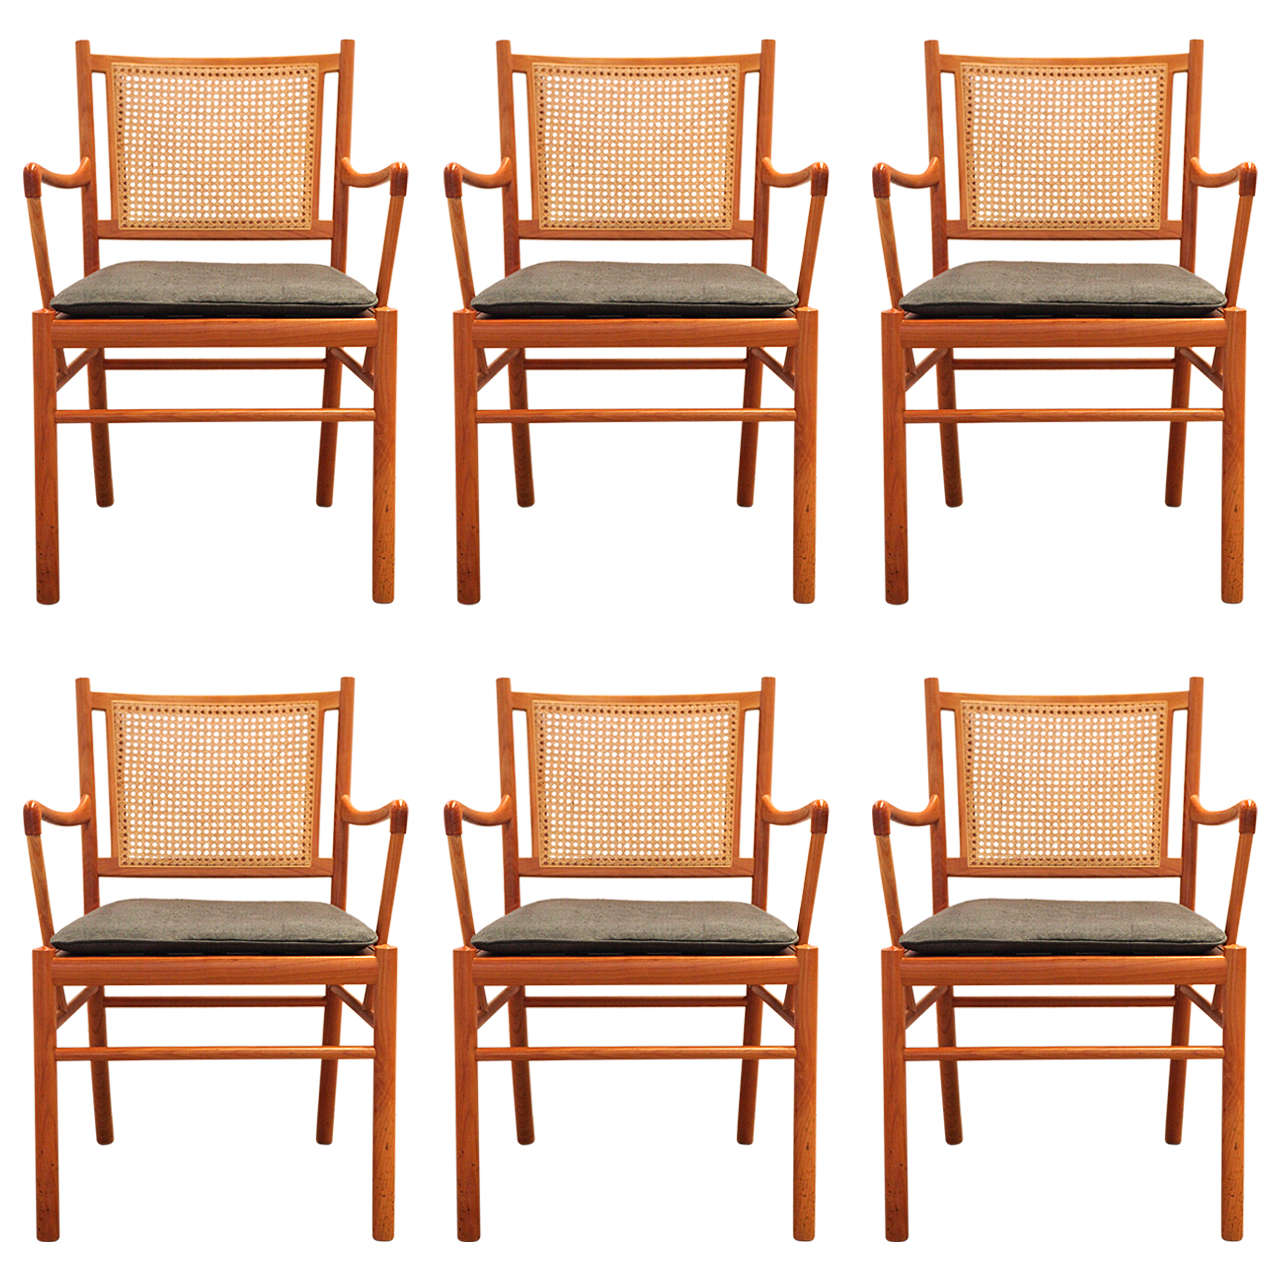 Set of Ole Wanscher Dining Chairs in Mahogany, Denmark, 1940